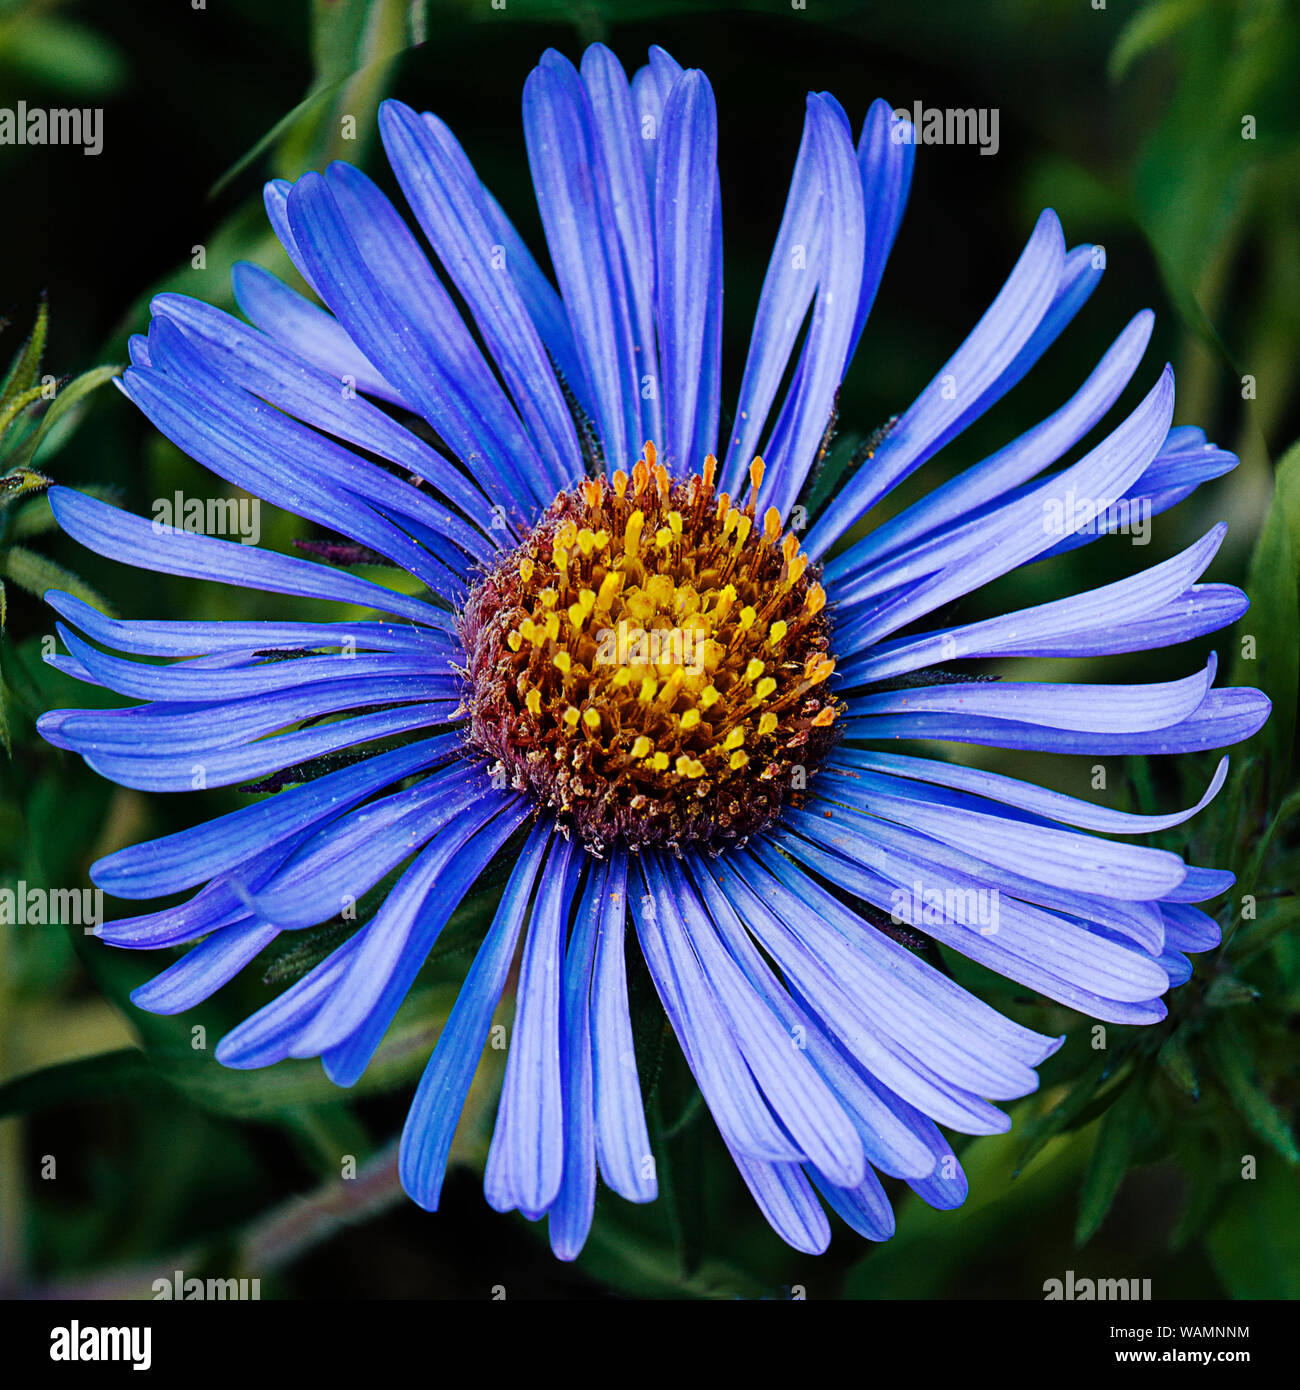 View point form directly above. Blue aster flower head on dark background. Stock Photo